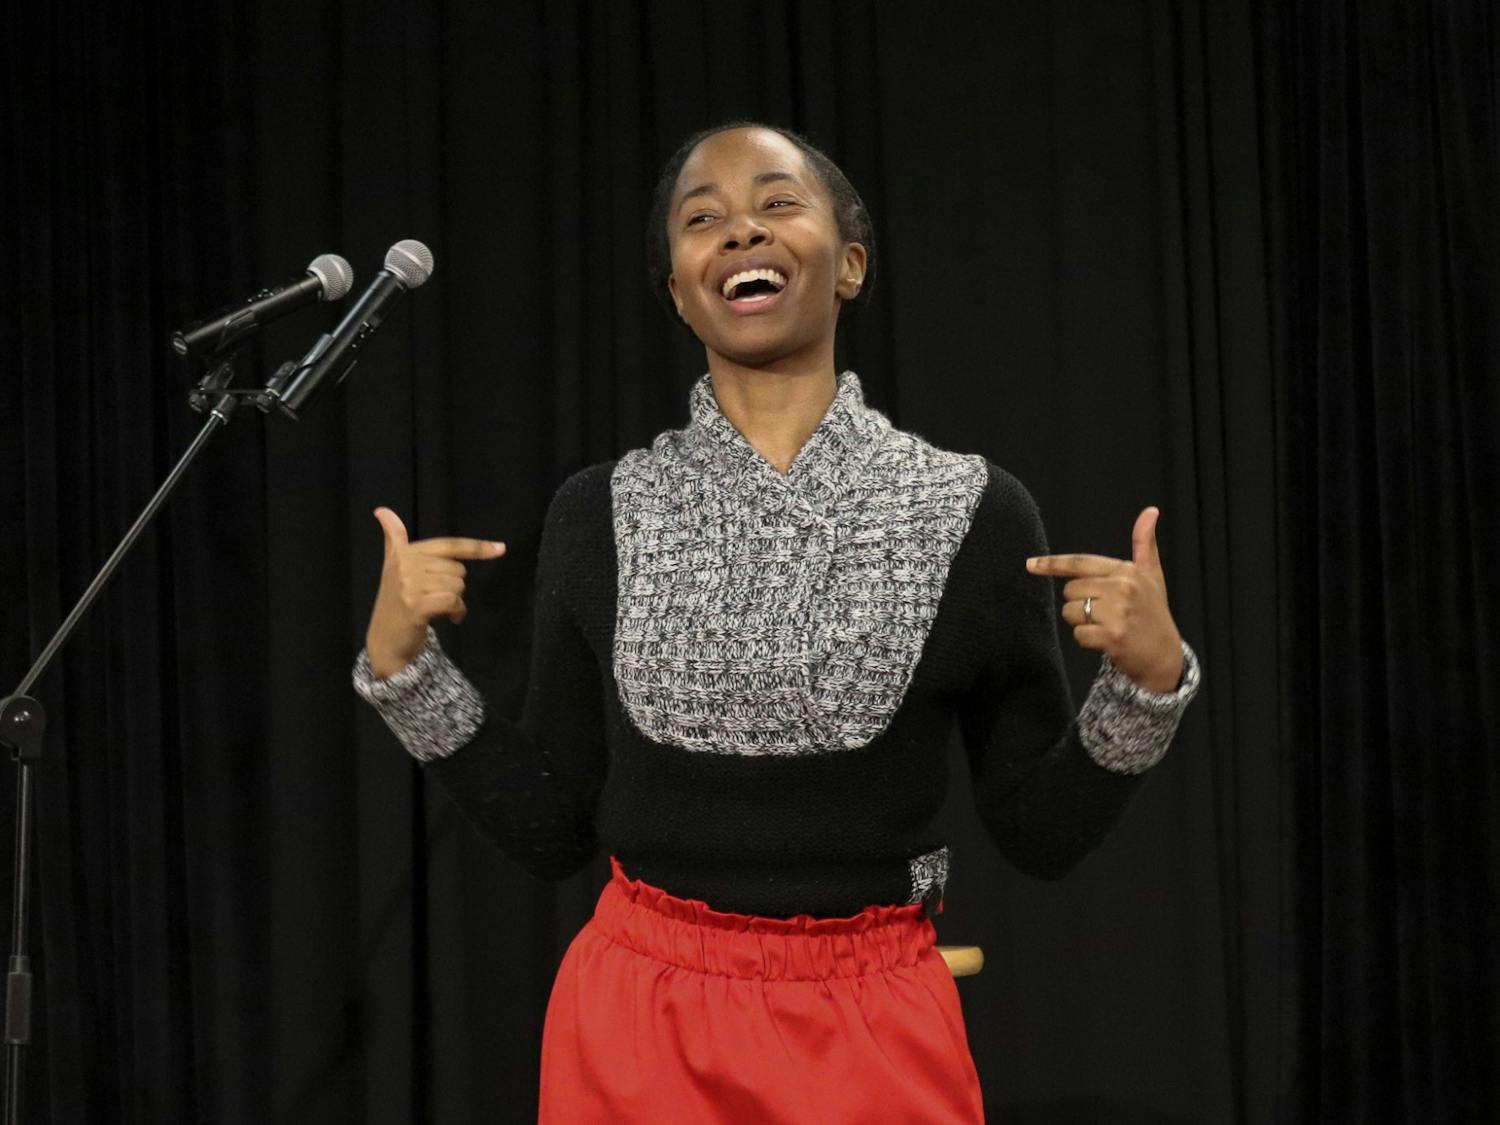 Traci Neal, a USC alumni and NY Times published writer delivers some slam poetry during the UniVerse Popcorn &amp; Poetry event on Jan. 26, 2022. First Lady Patricia Harris-Pastides, creator of UniVERSE, was in attendance during the event.